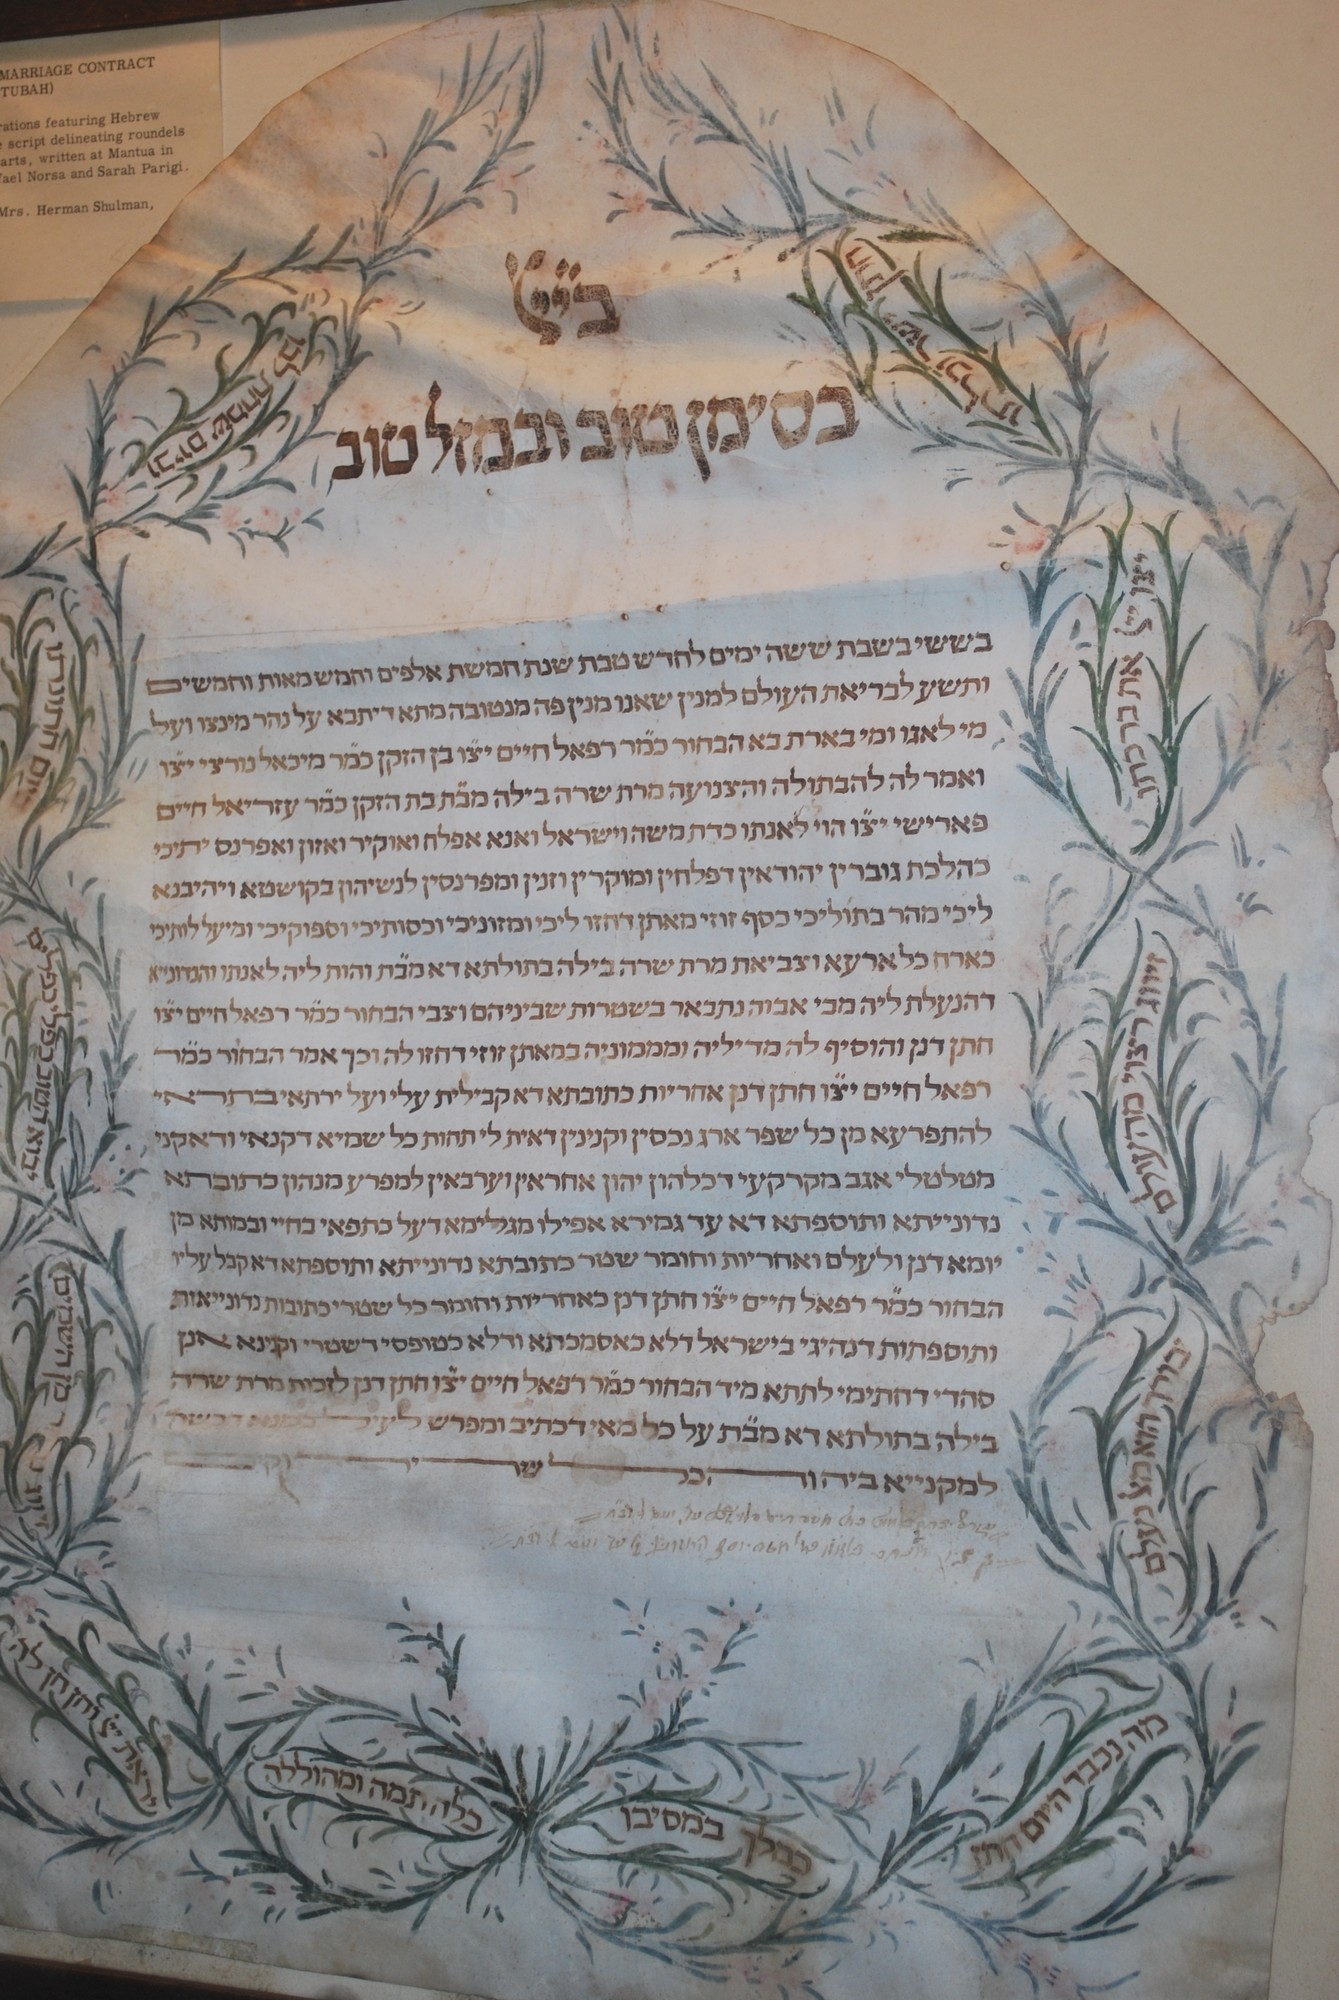 A 1799 ketubah on Italian parchment on display in the May Museum of Temple Israel. It is Jewish prenuptial agreement that outlines the rights and responsibilities of the groom, in relation to the bride.